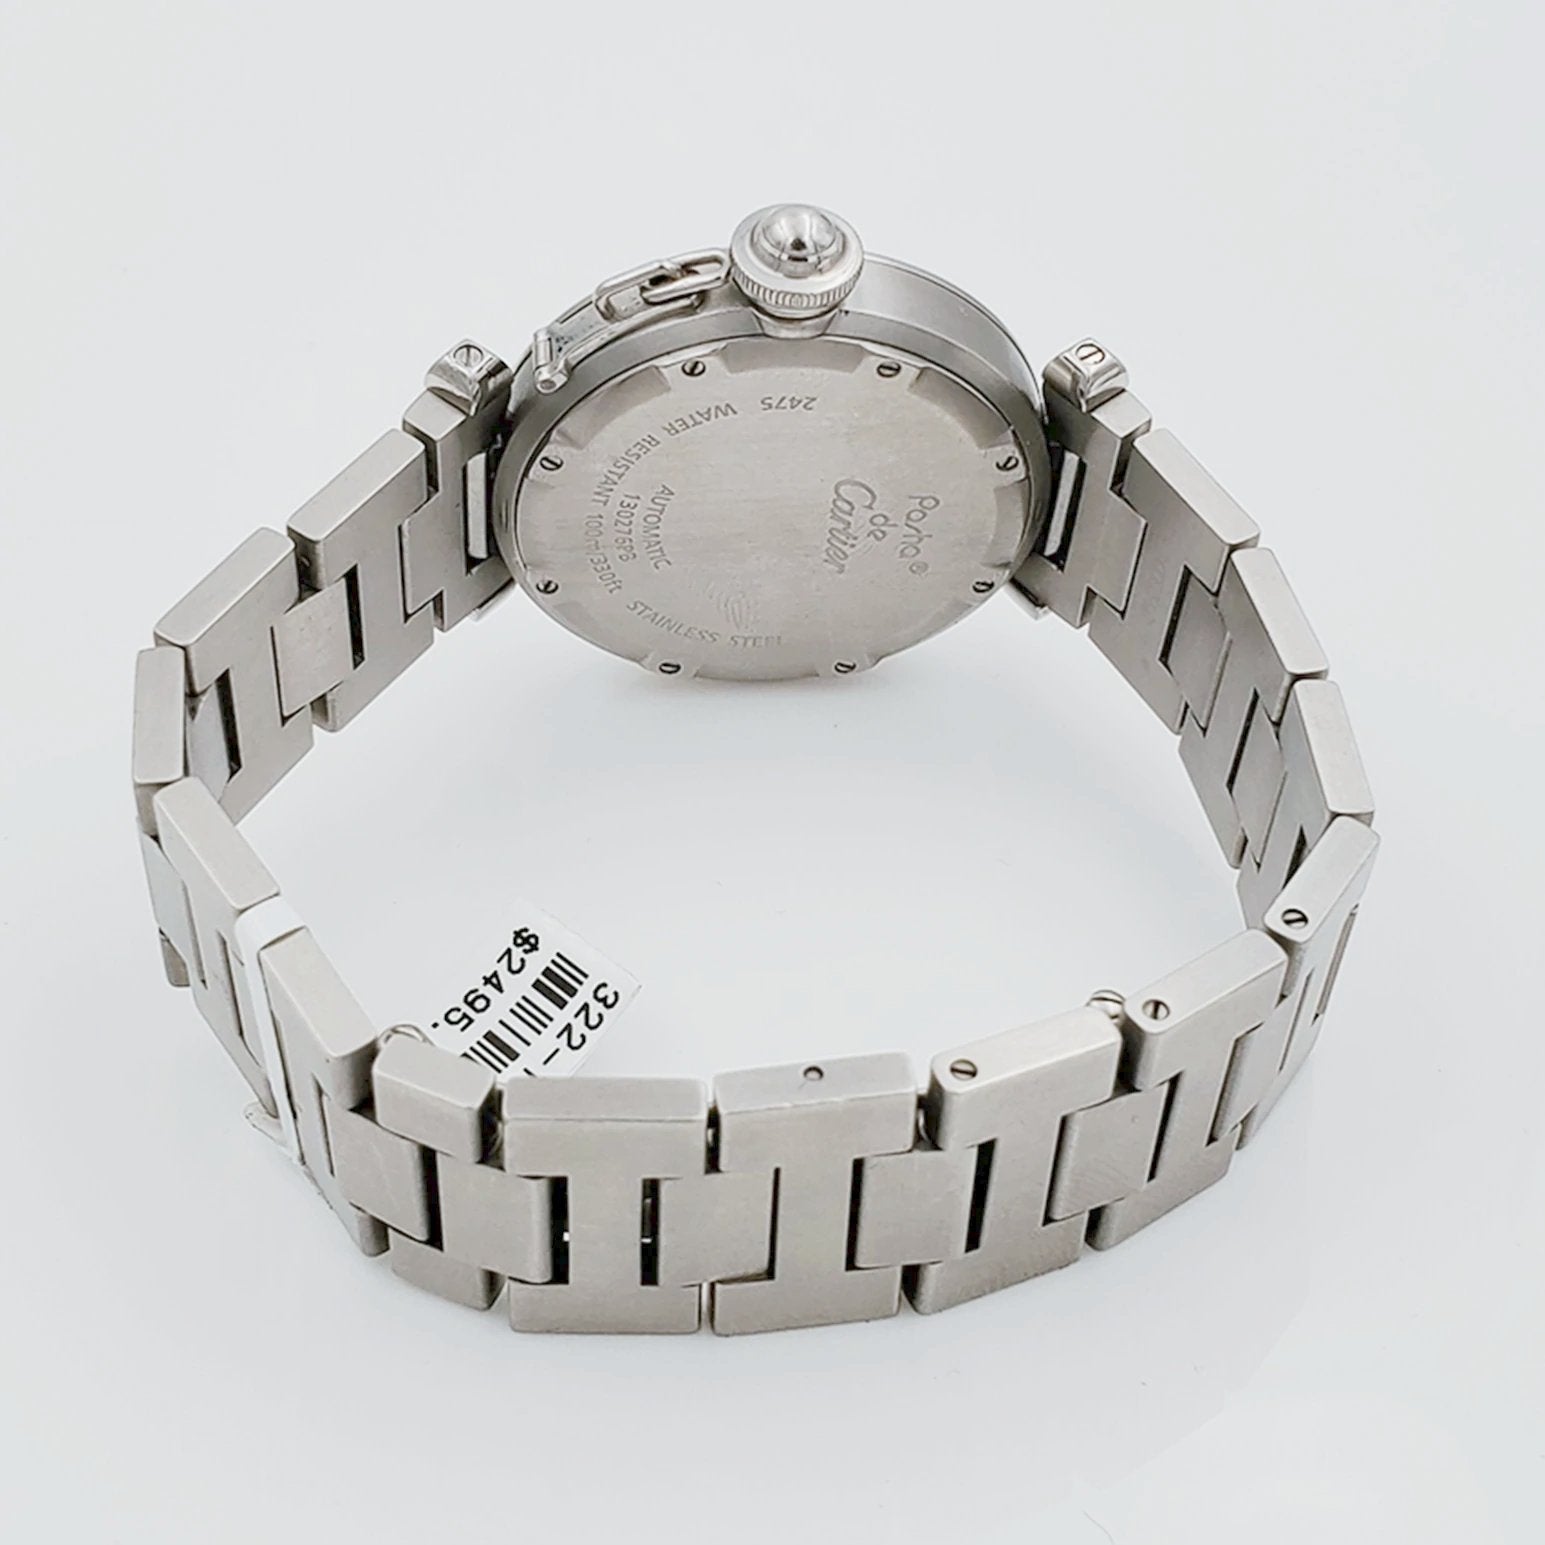 Unisex Medium 36mm Cartier Pasha Watch with White Dial in Matte Stainless Steel. (Pre-Owned)